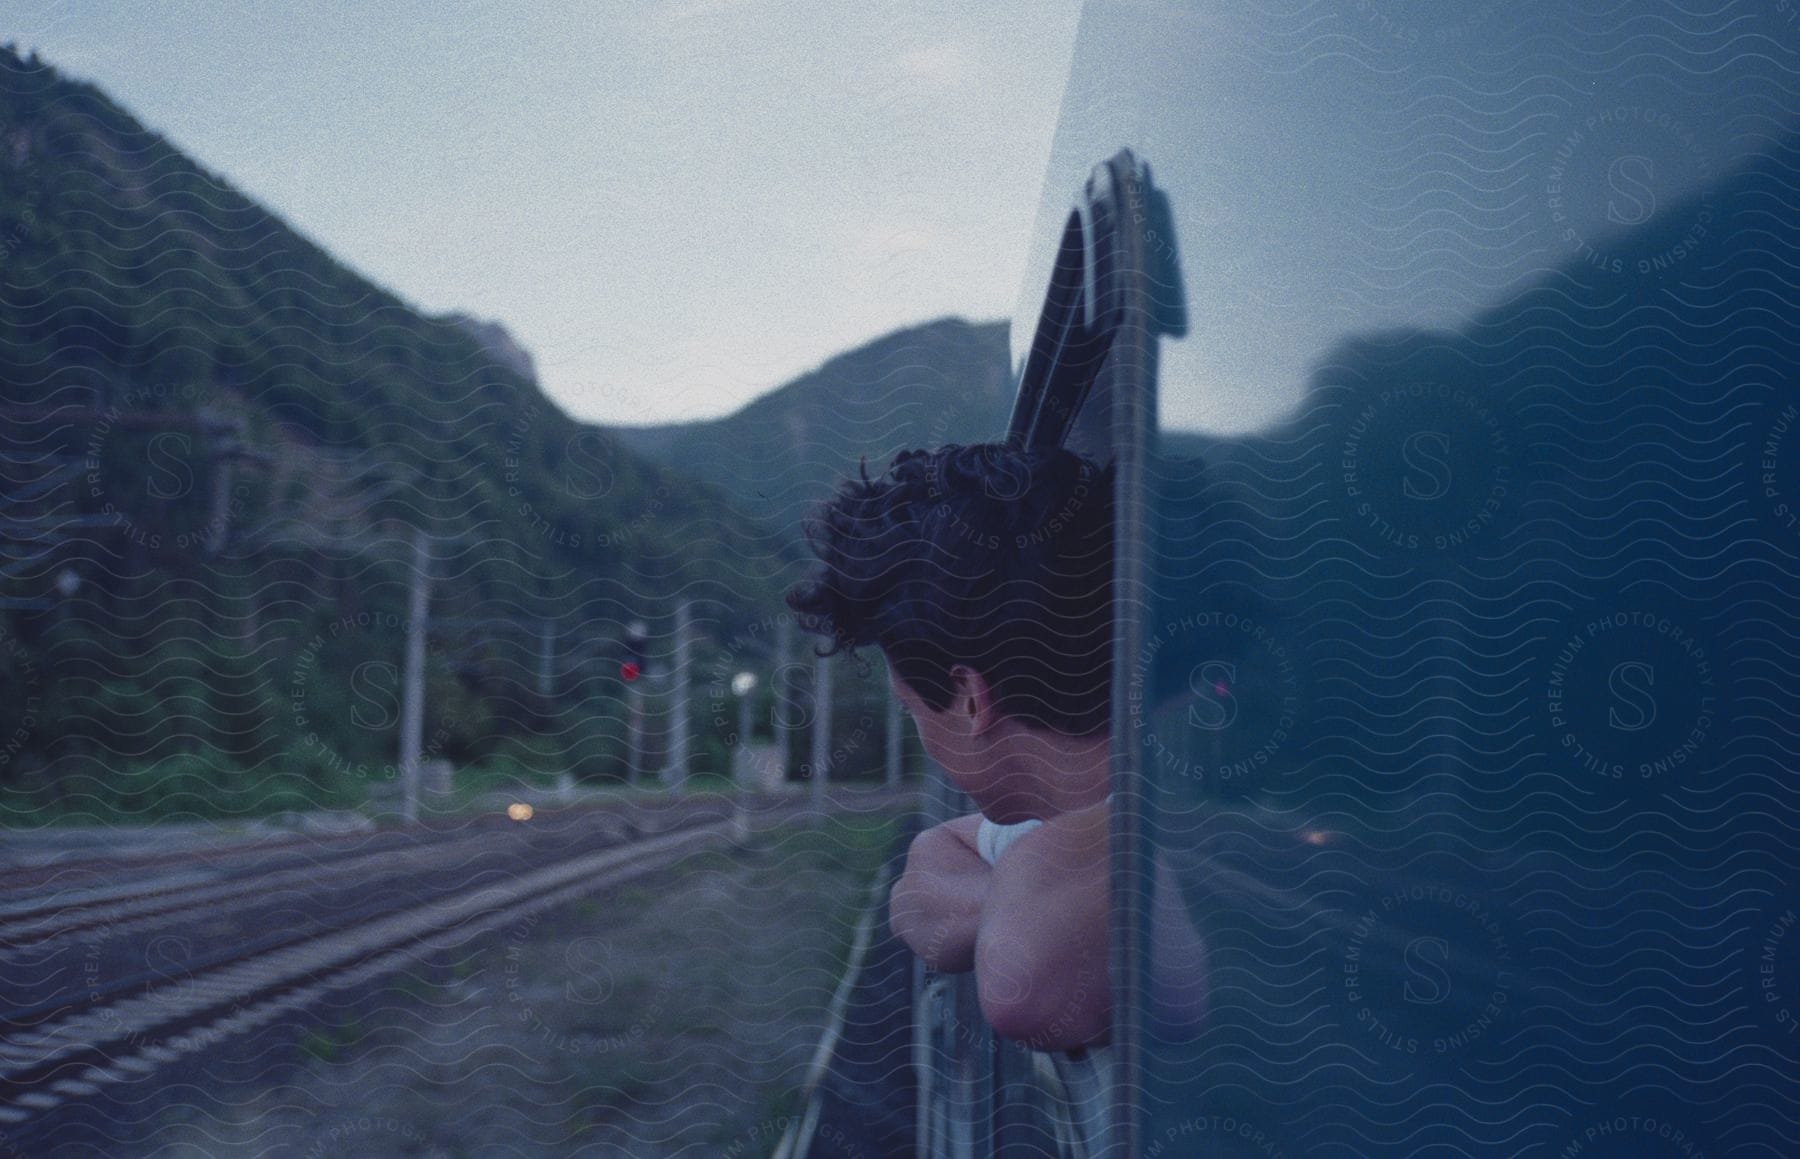 A man leans out of a train window as it travels through a mountainous region on a cloudy day